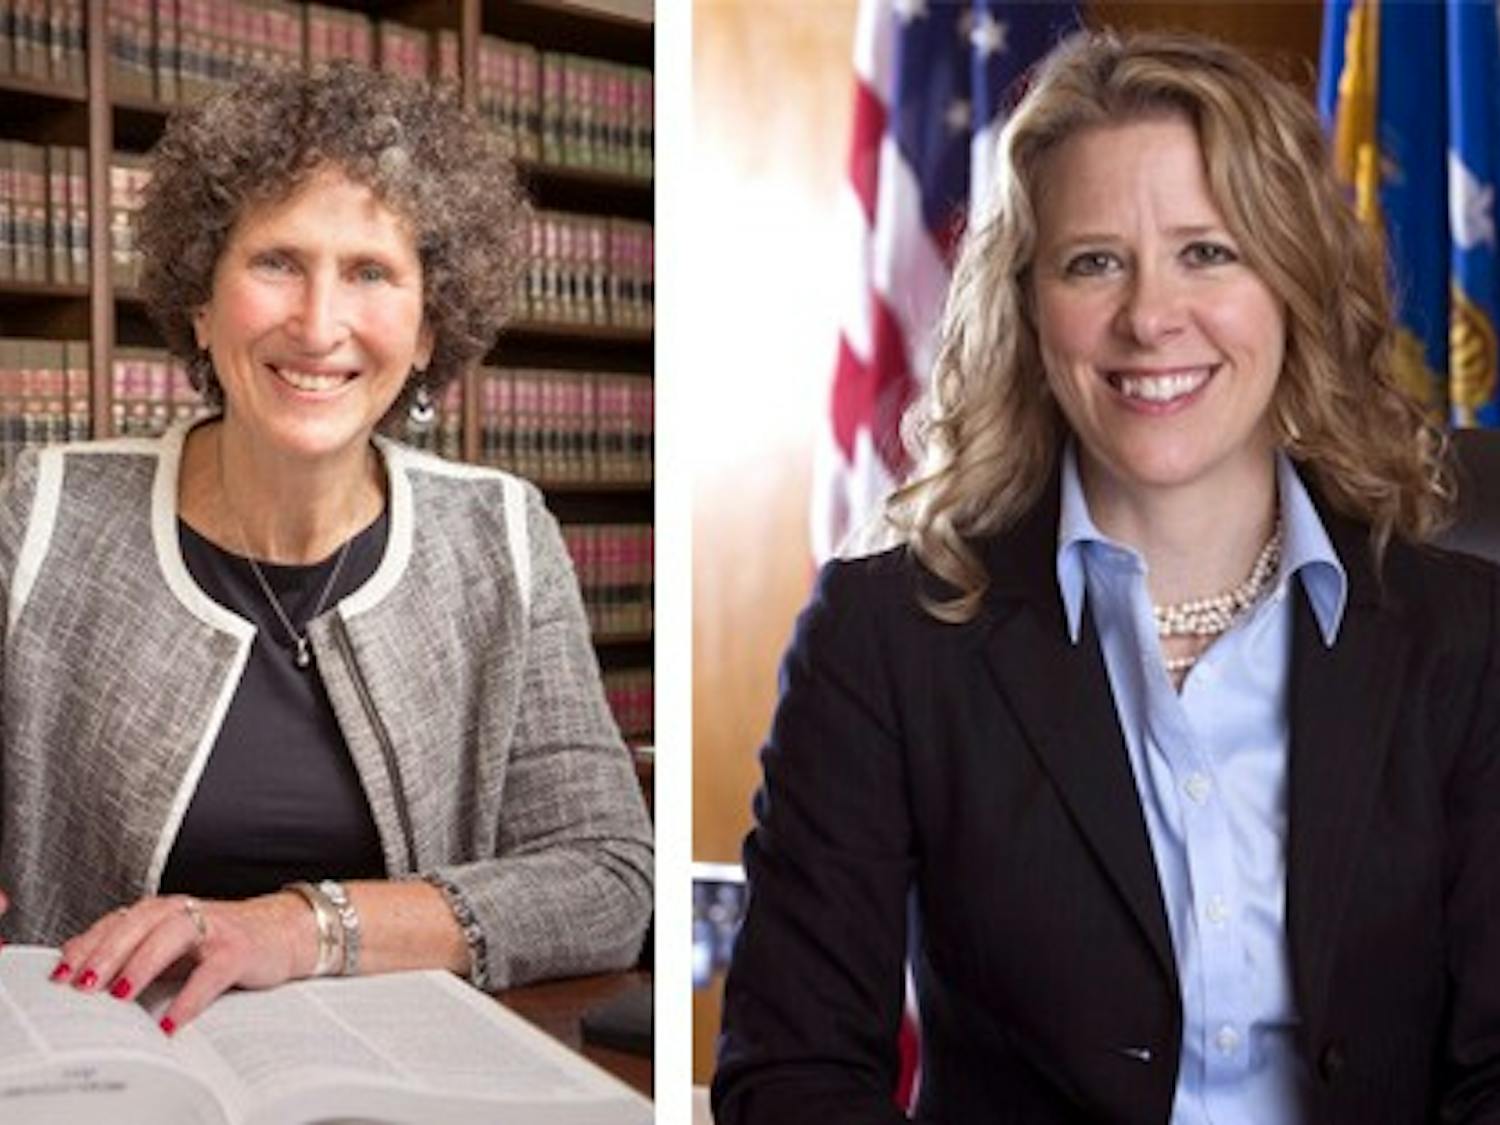 JoAnne Kloppenburg (left) and Rebecca Bradley will face off for a seat on the Wisconsin State Supreme Court in the April 5 Primary election.